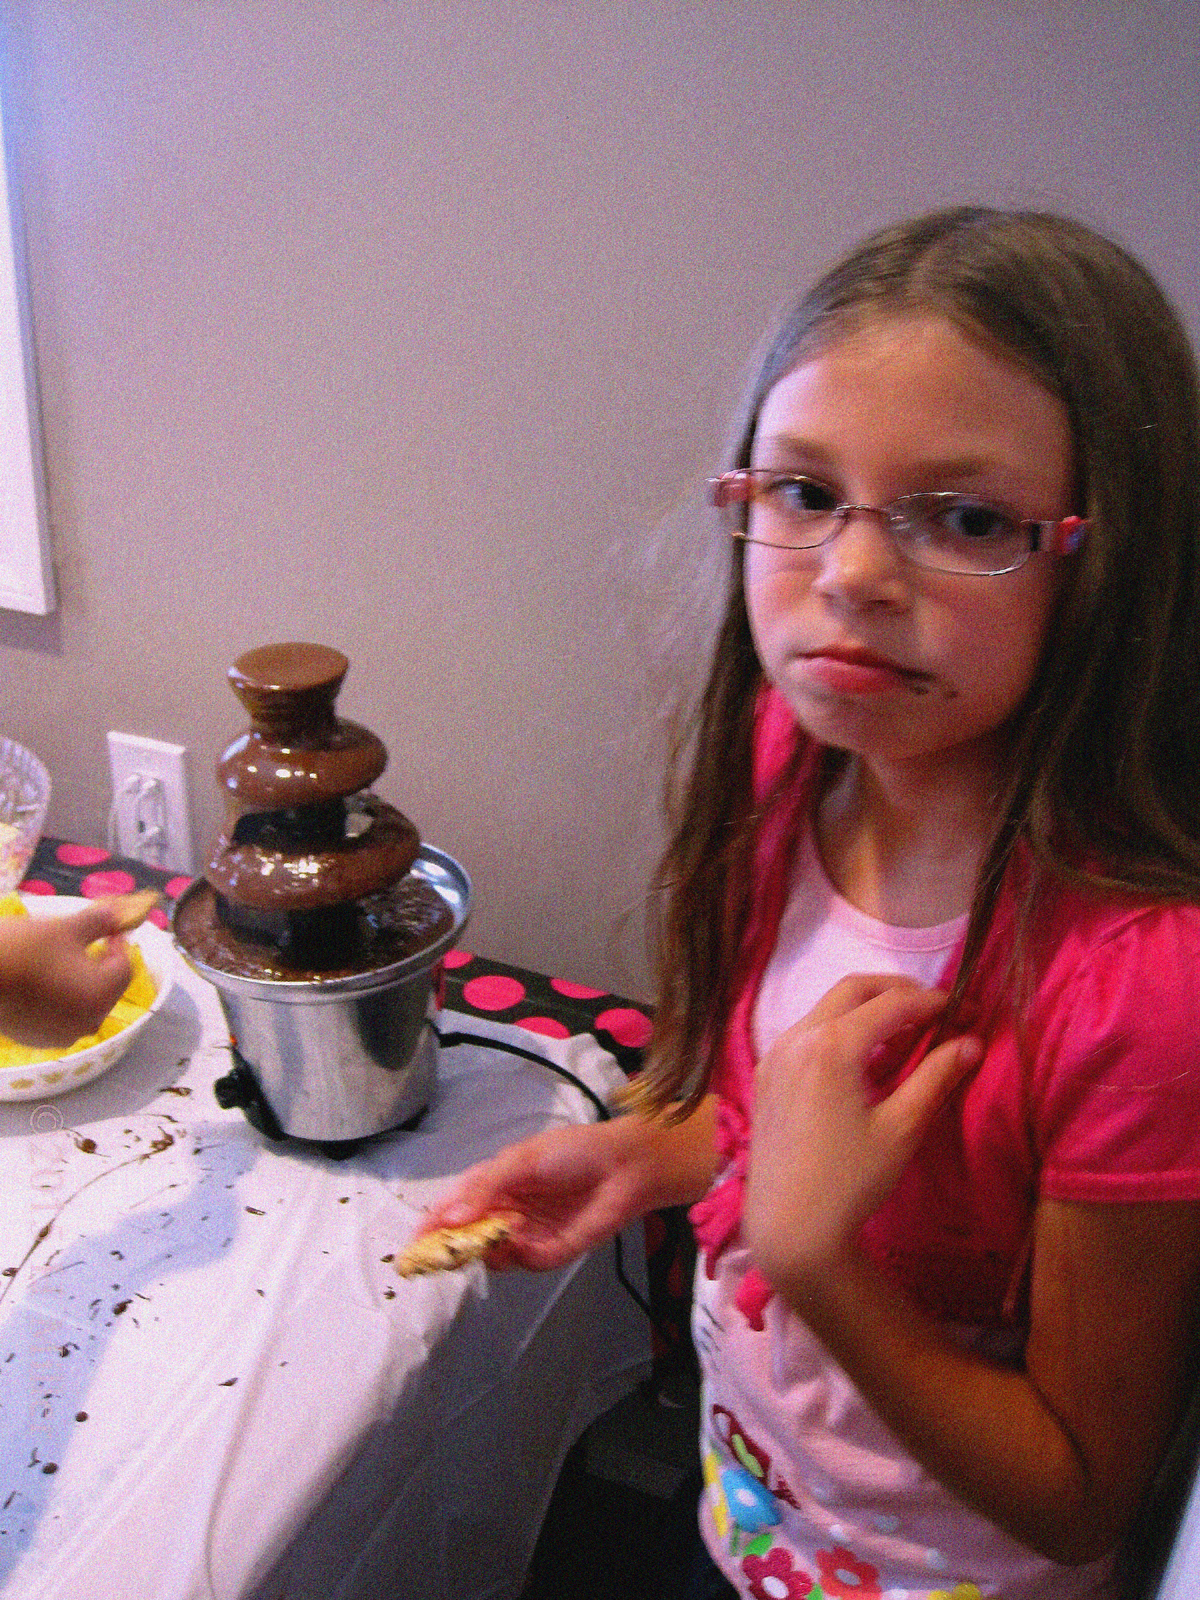 The Birthday Girl Eating Cookies Dipped In The Chocolate Fountain.